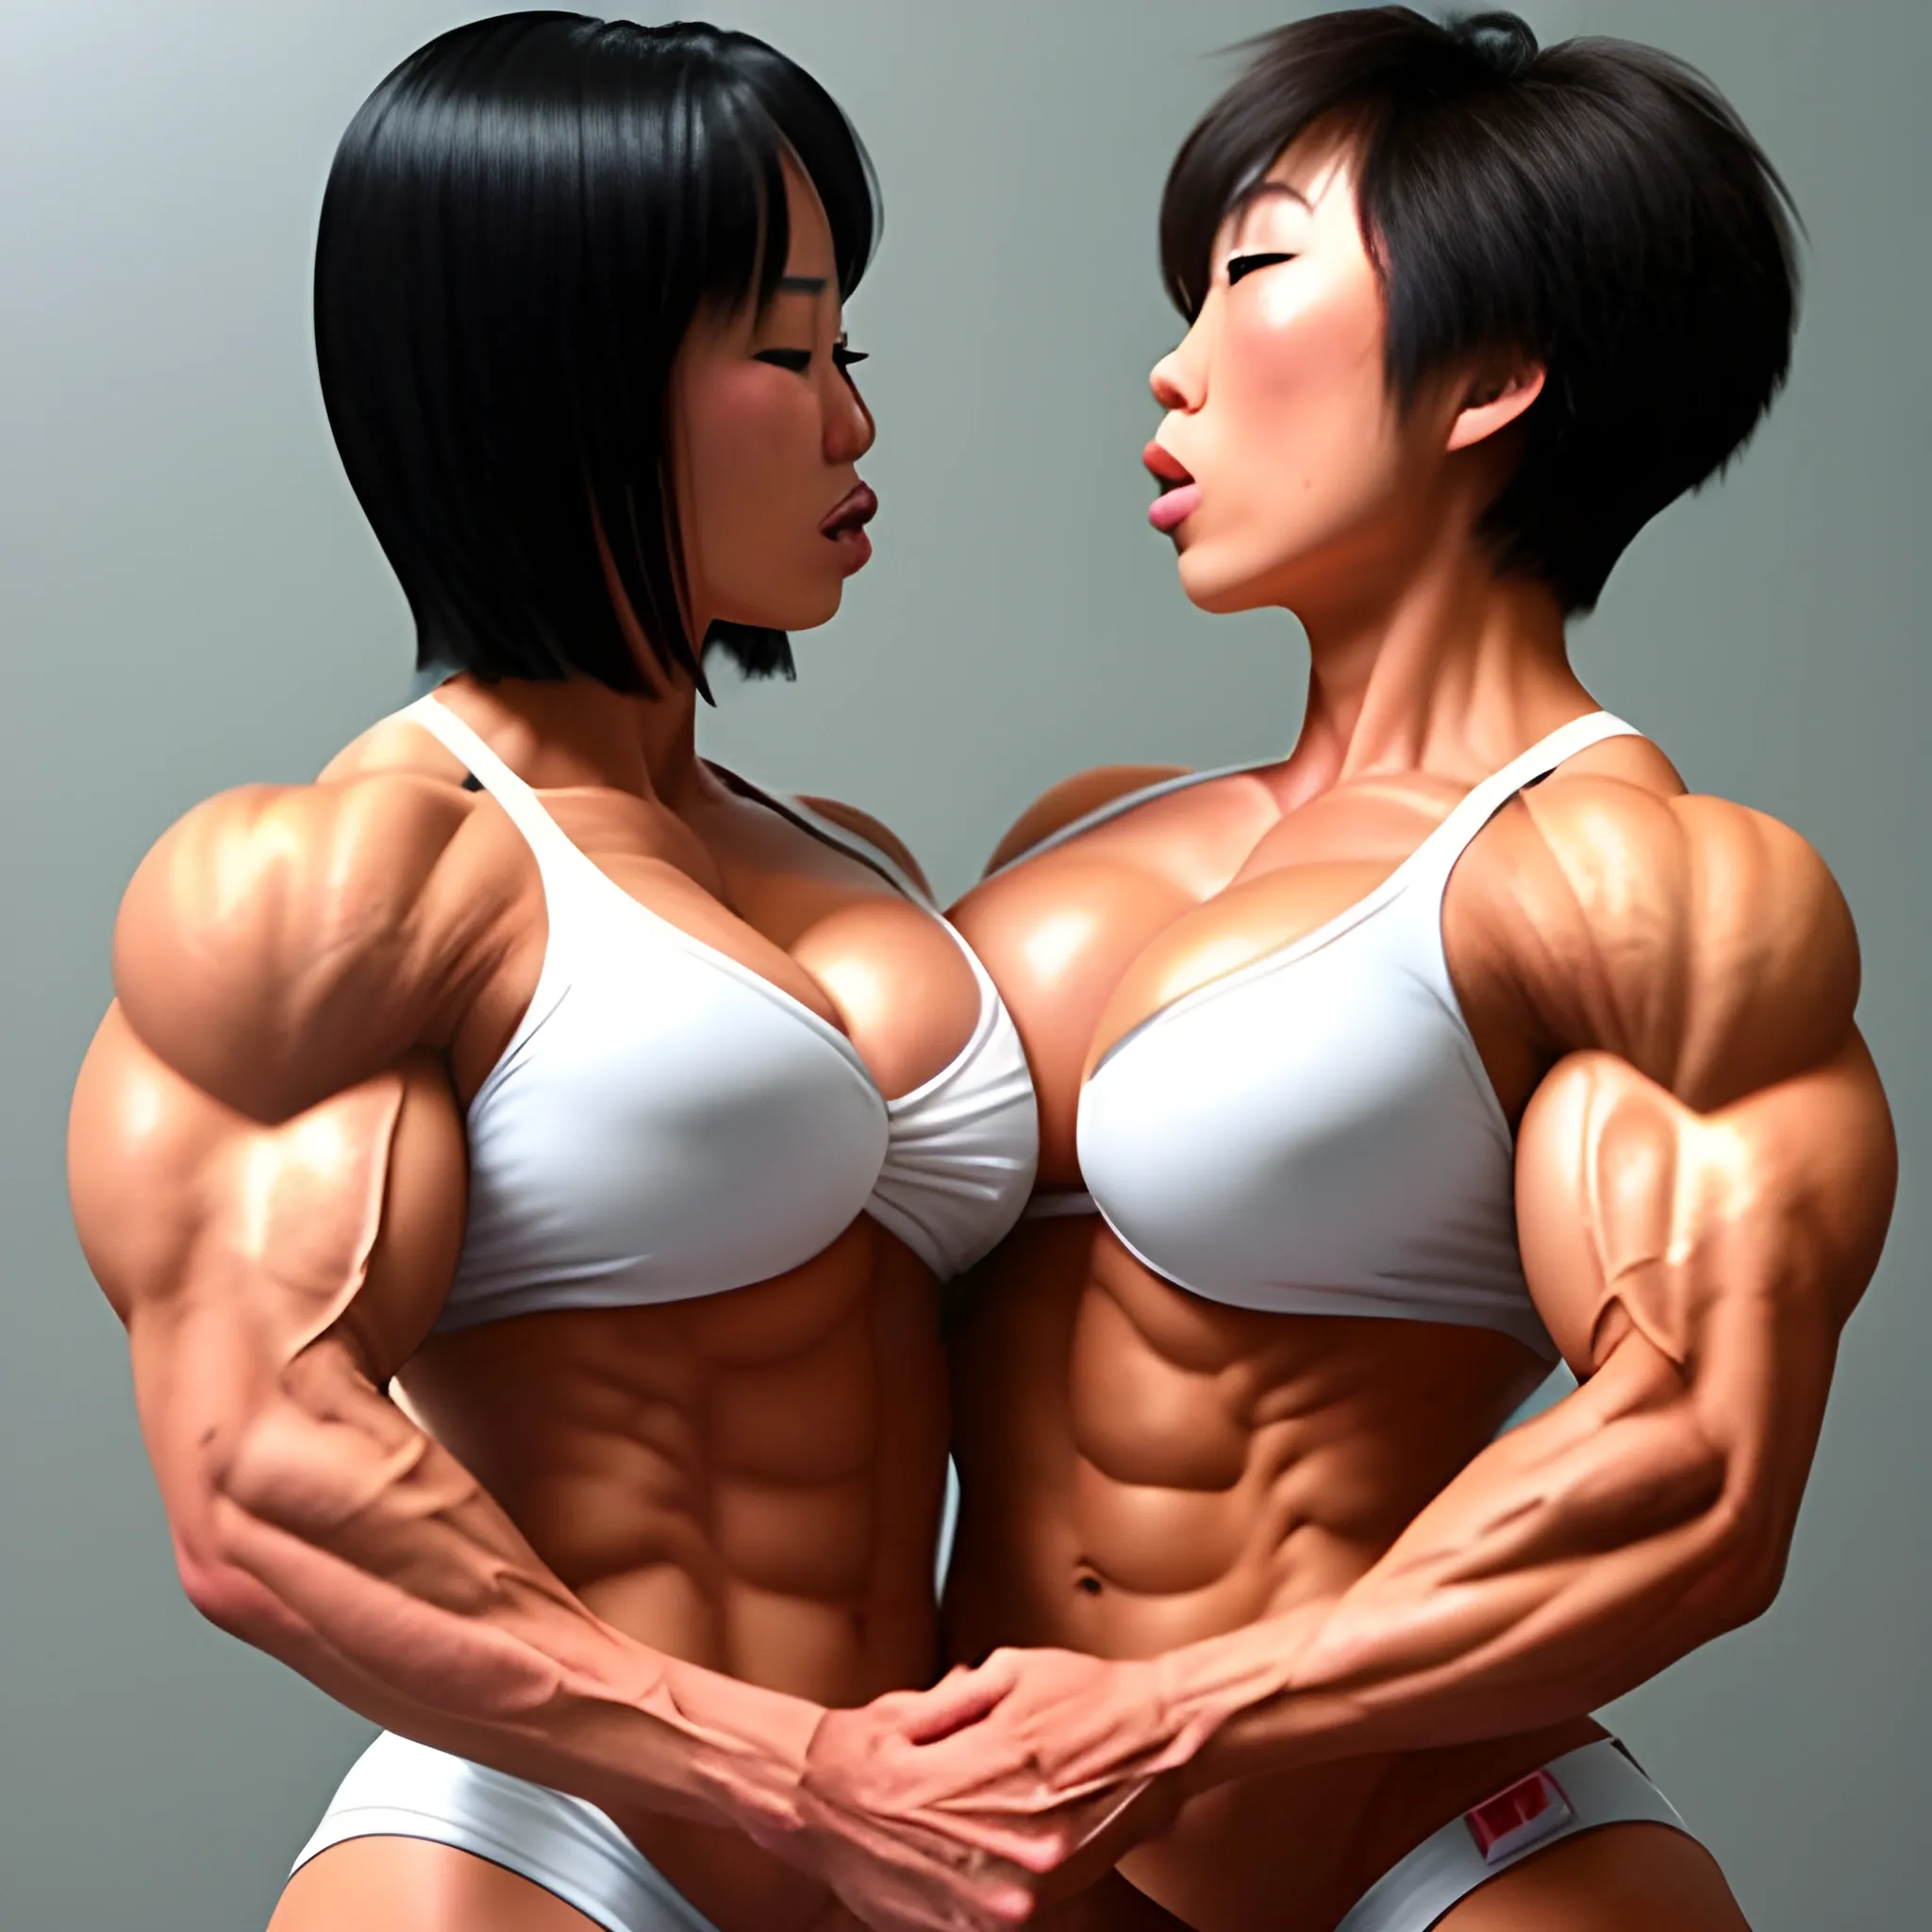 Two sexy Asian female bodybuilders kissing